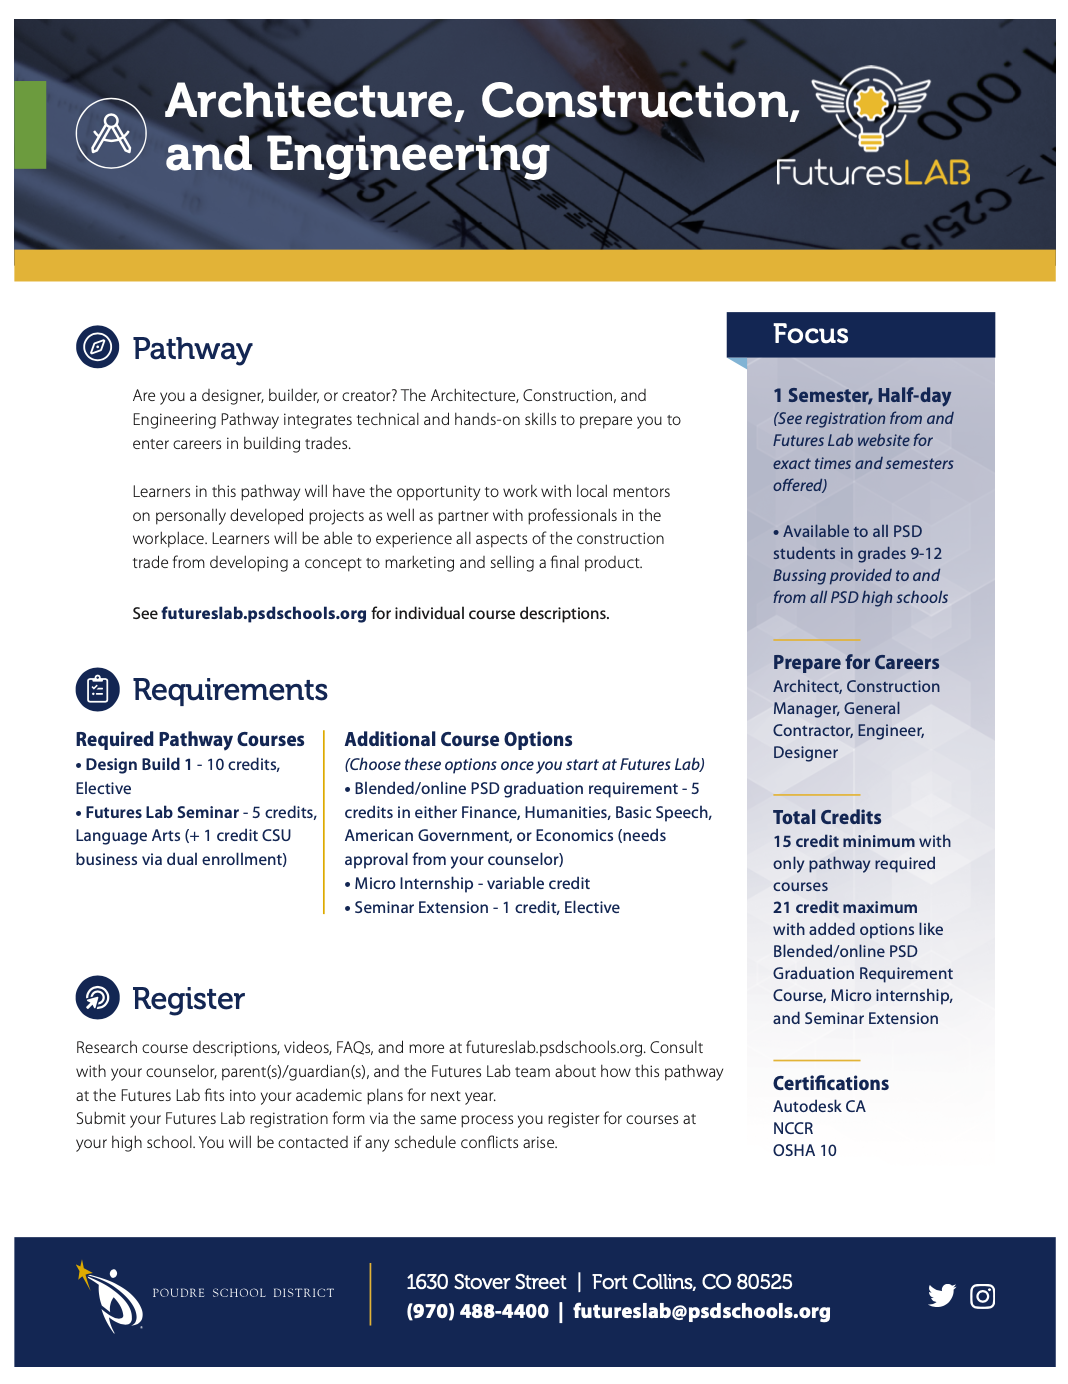 Architecture, Construction, & Engineering flyer